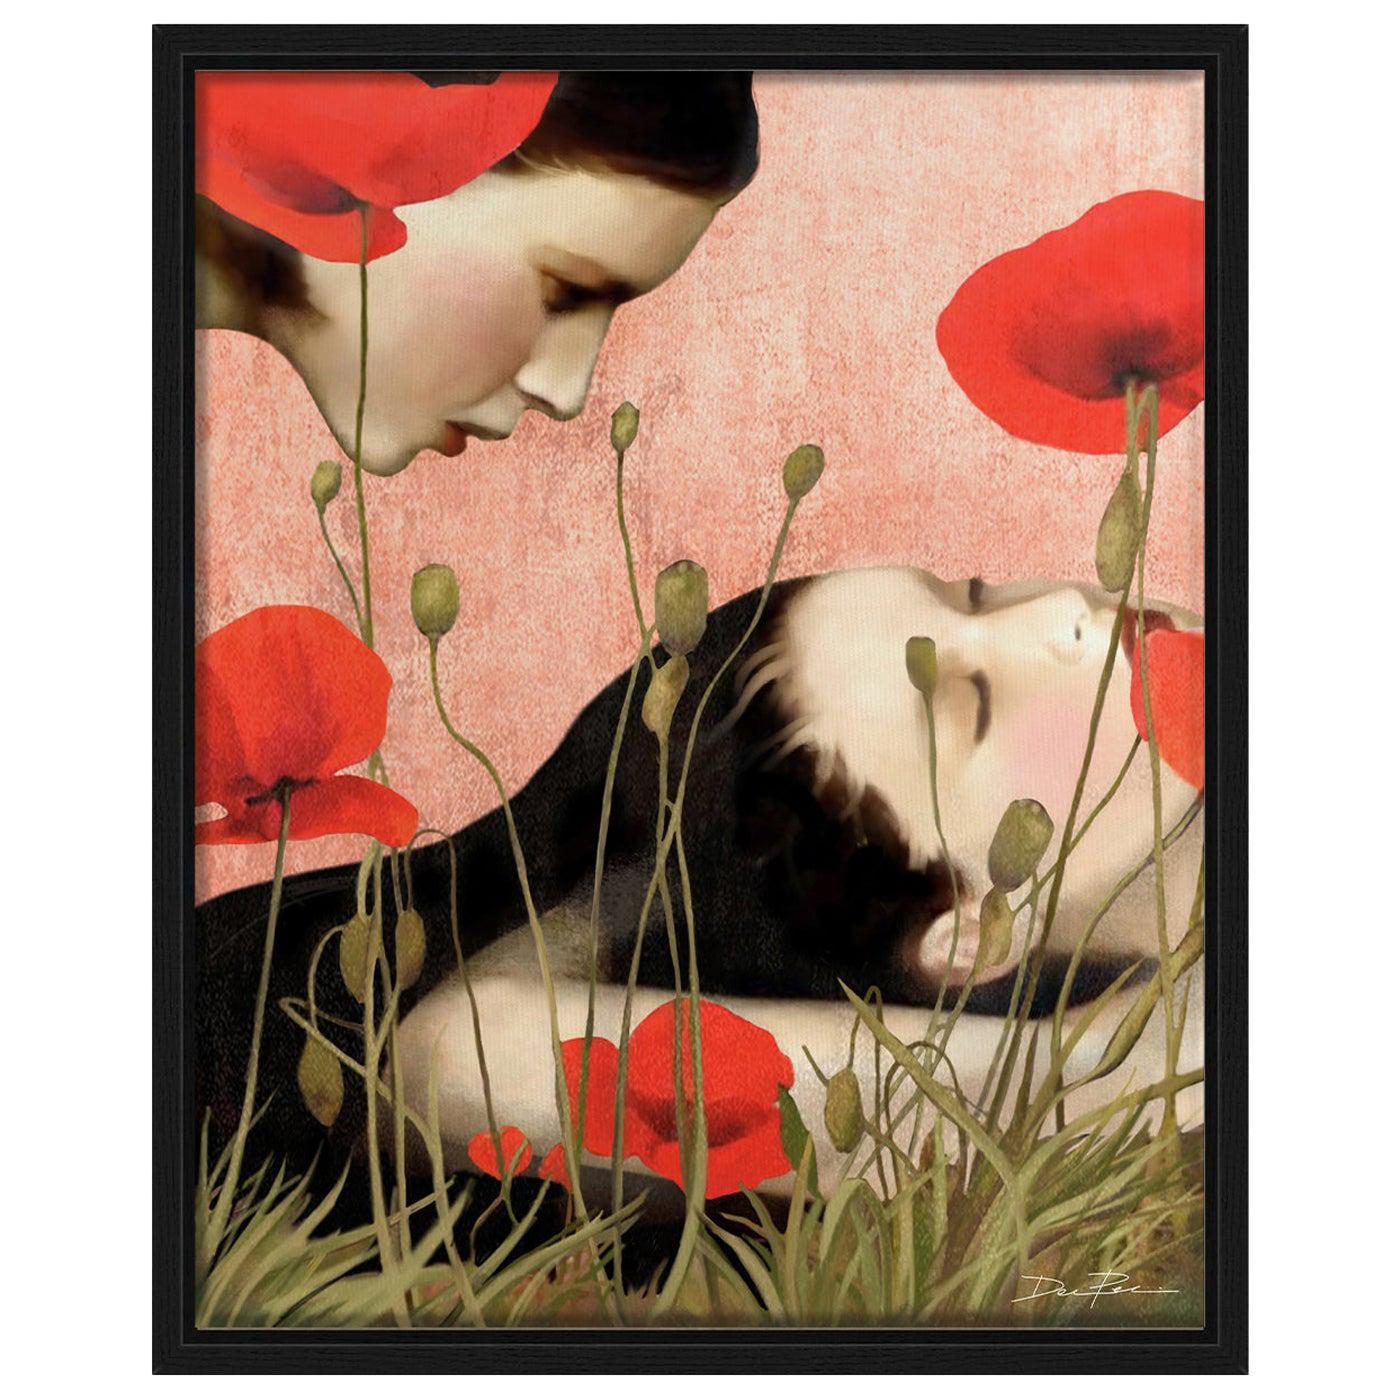 Dreaming in a Field of Poppies Digital Painting